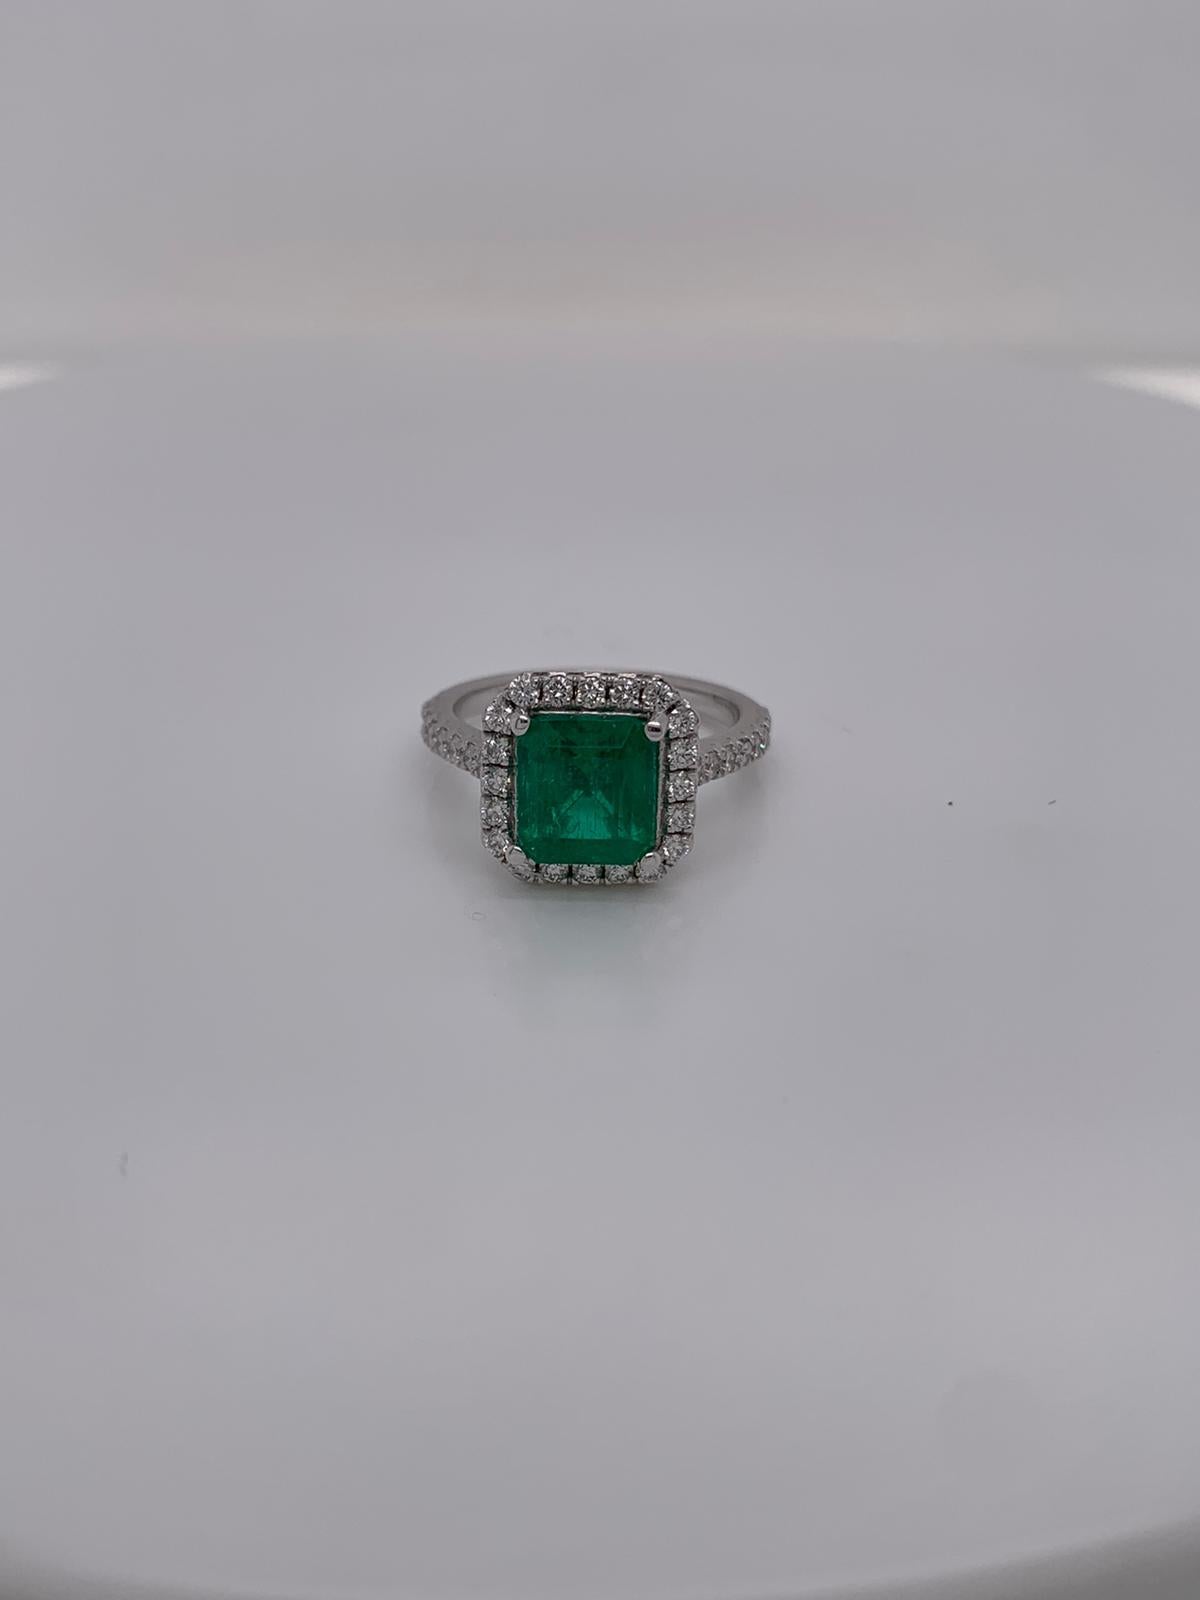 Square emerald weighing 2.10 cts
Measuring (7.9x6.1) mm
36 pieces of diamonds weighing .54 cts
Set in 14k white gold ring